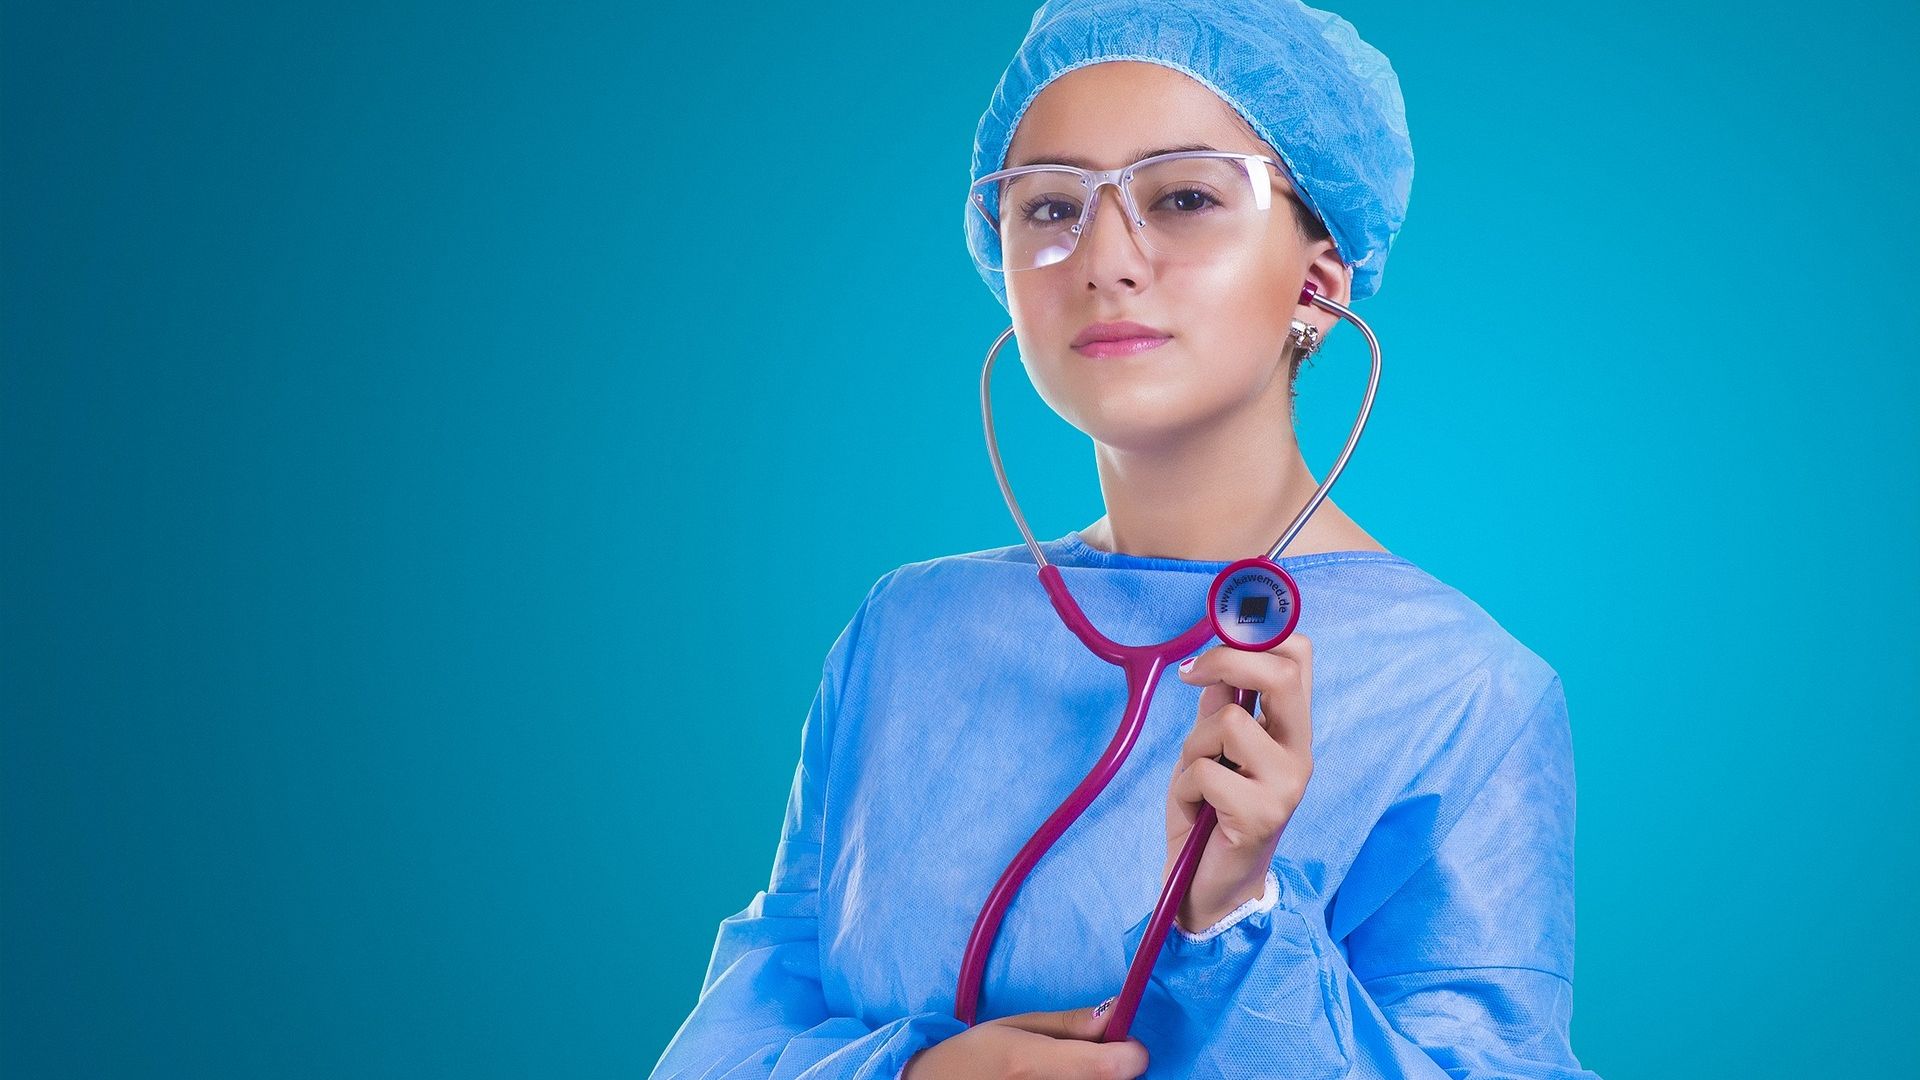 Woman in a medical gown and hat holding a stethoscope